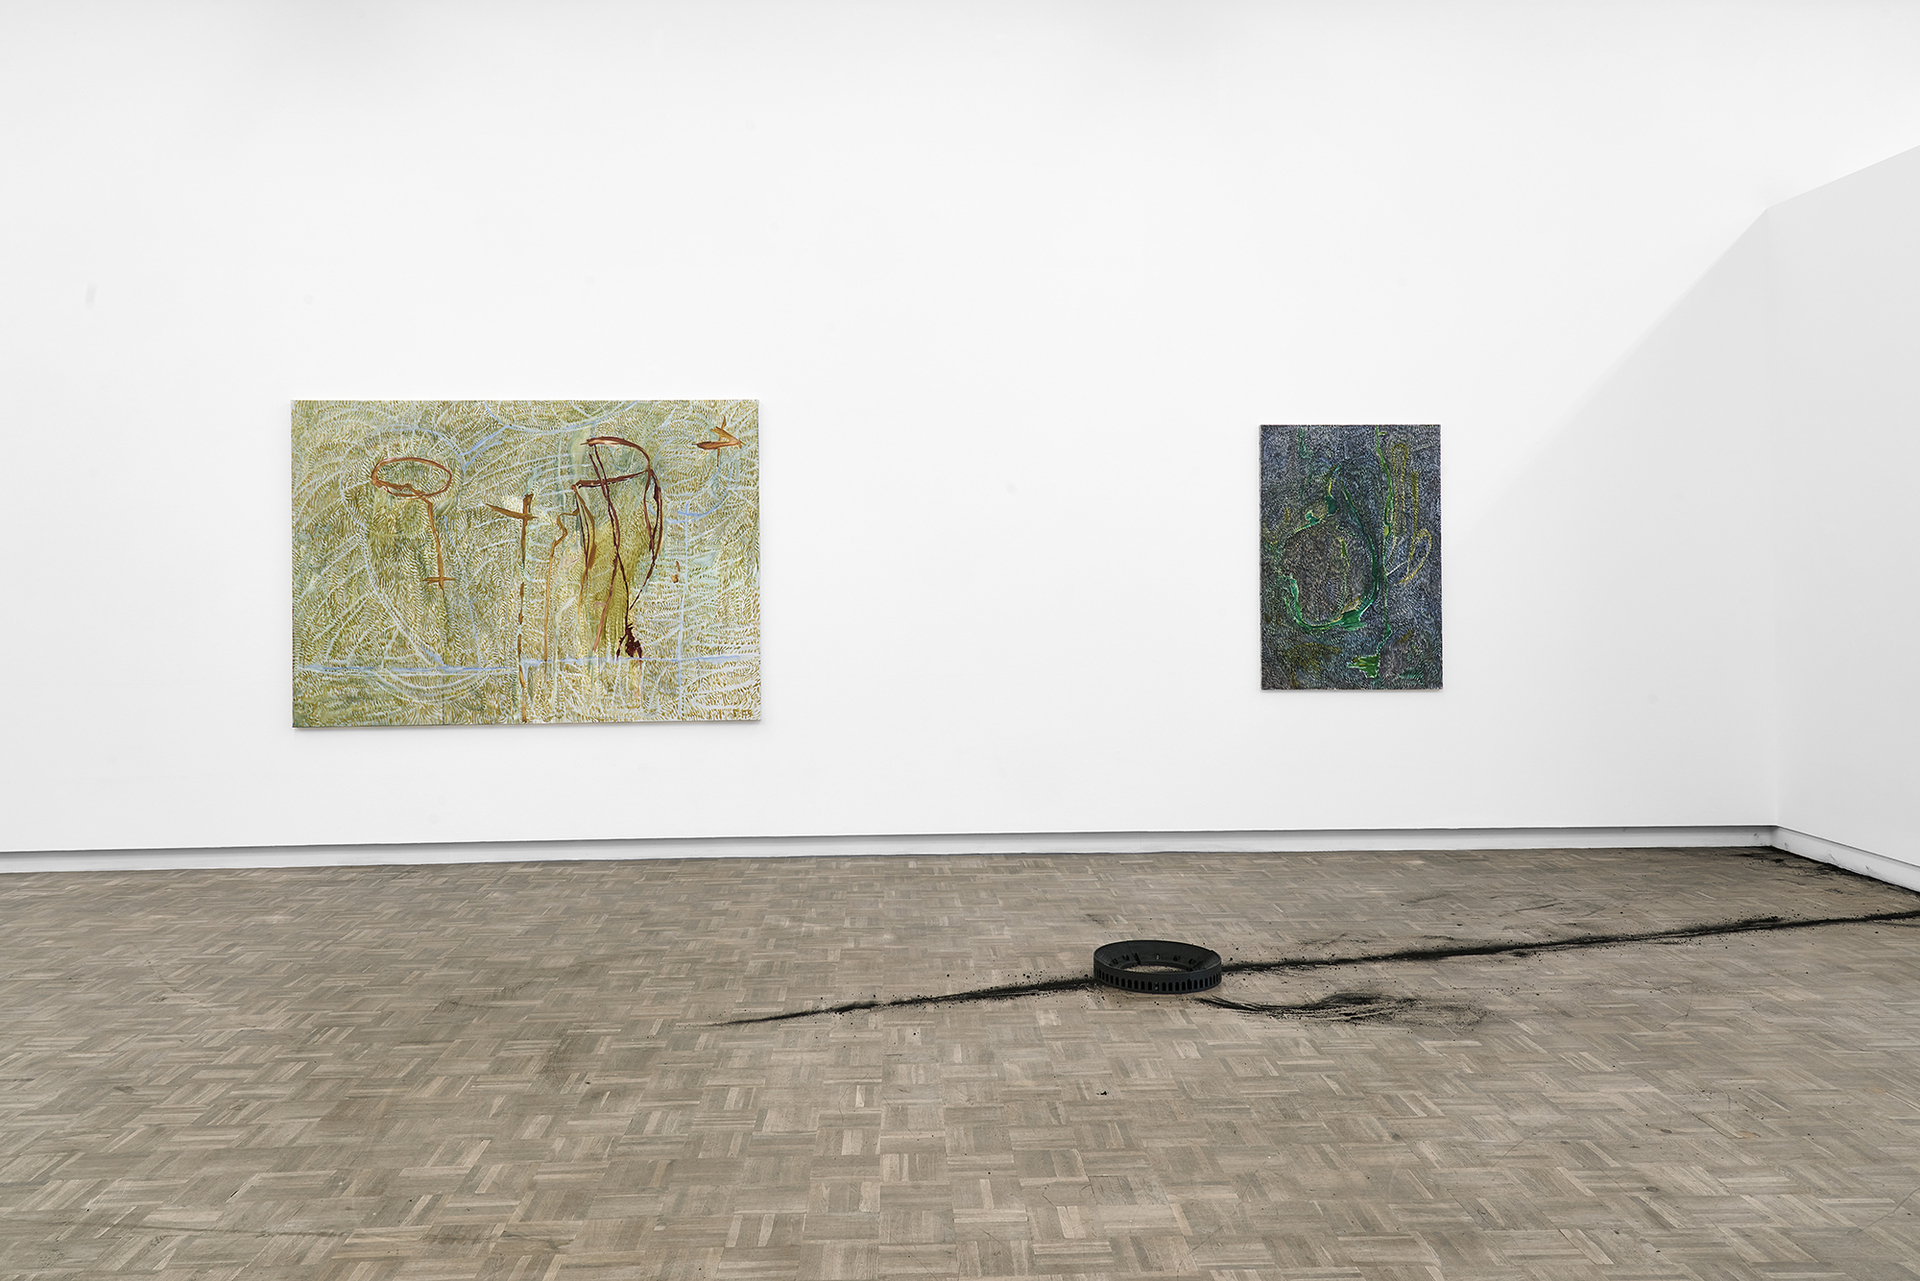 Achraf Touloub, 'Vies paralleles', 2022 | Installation view at blank projects, Cape Town (2)